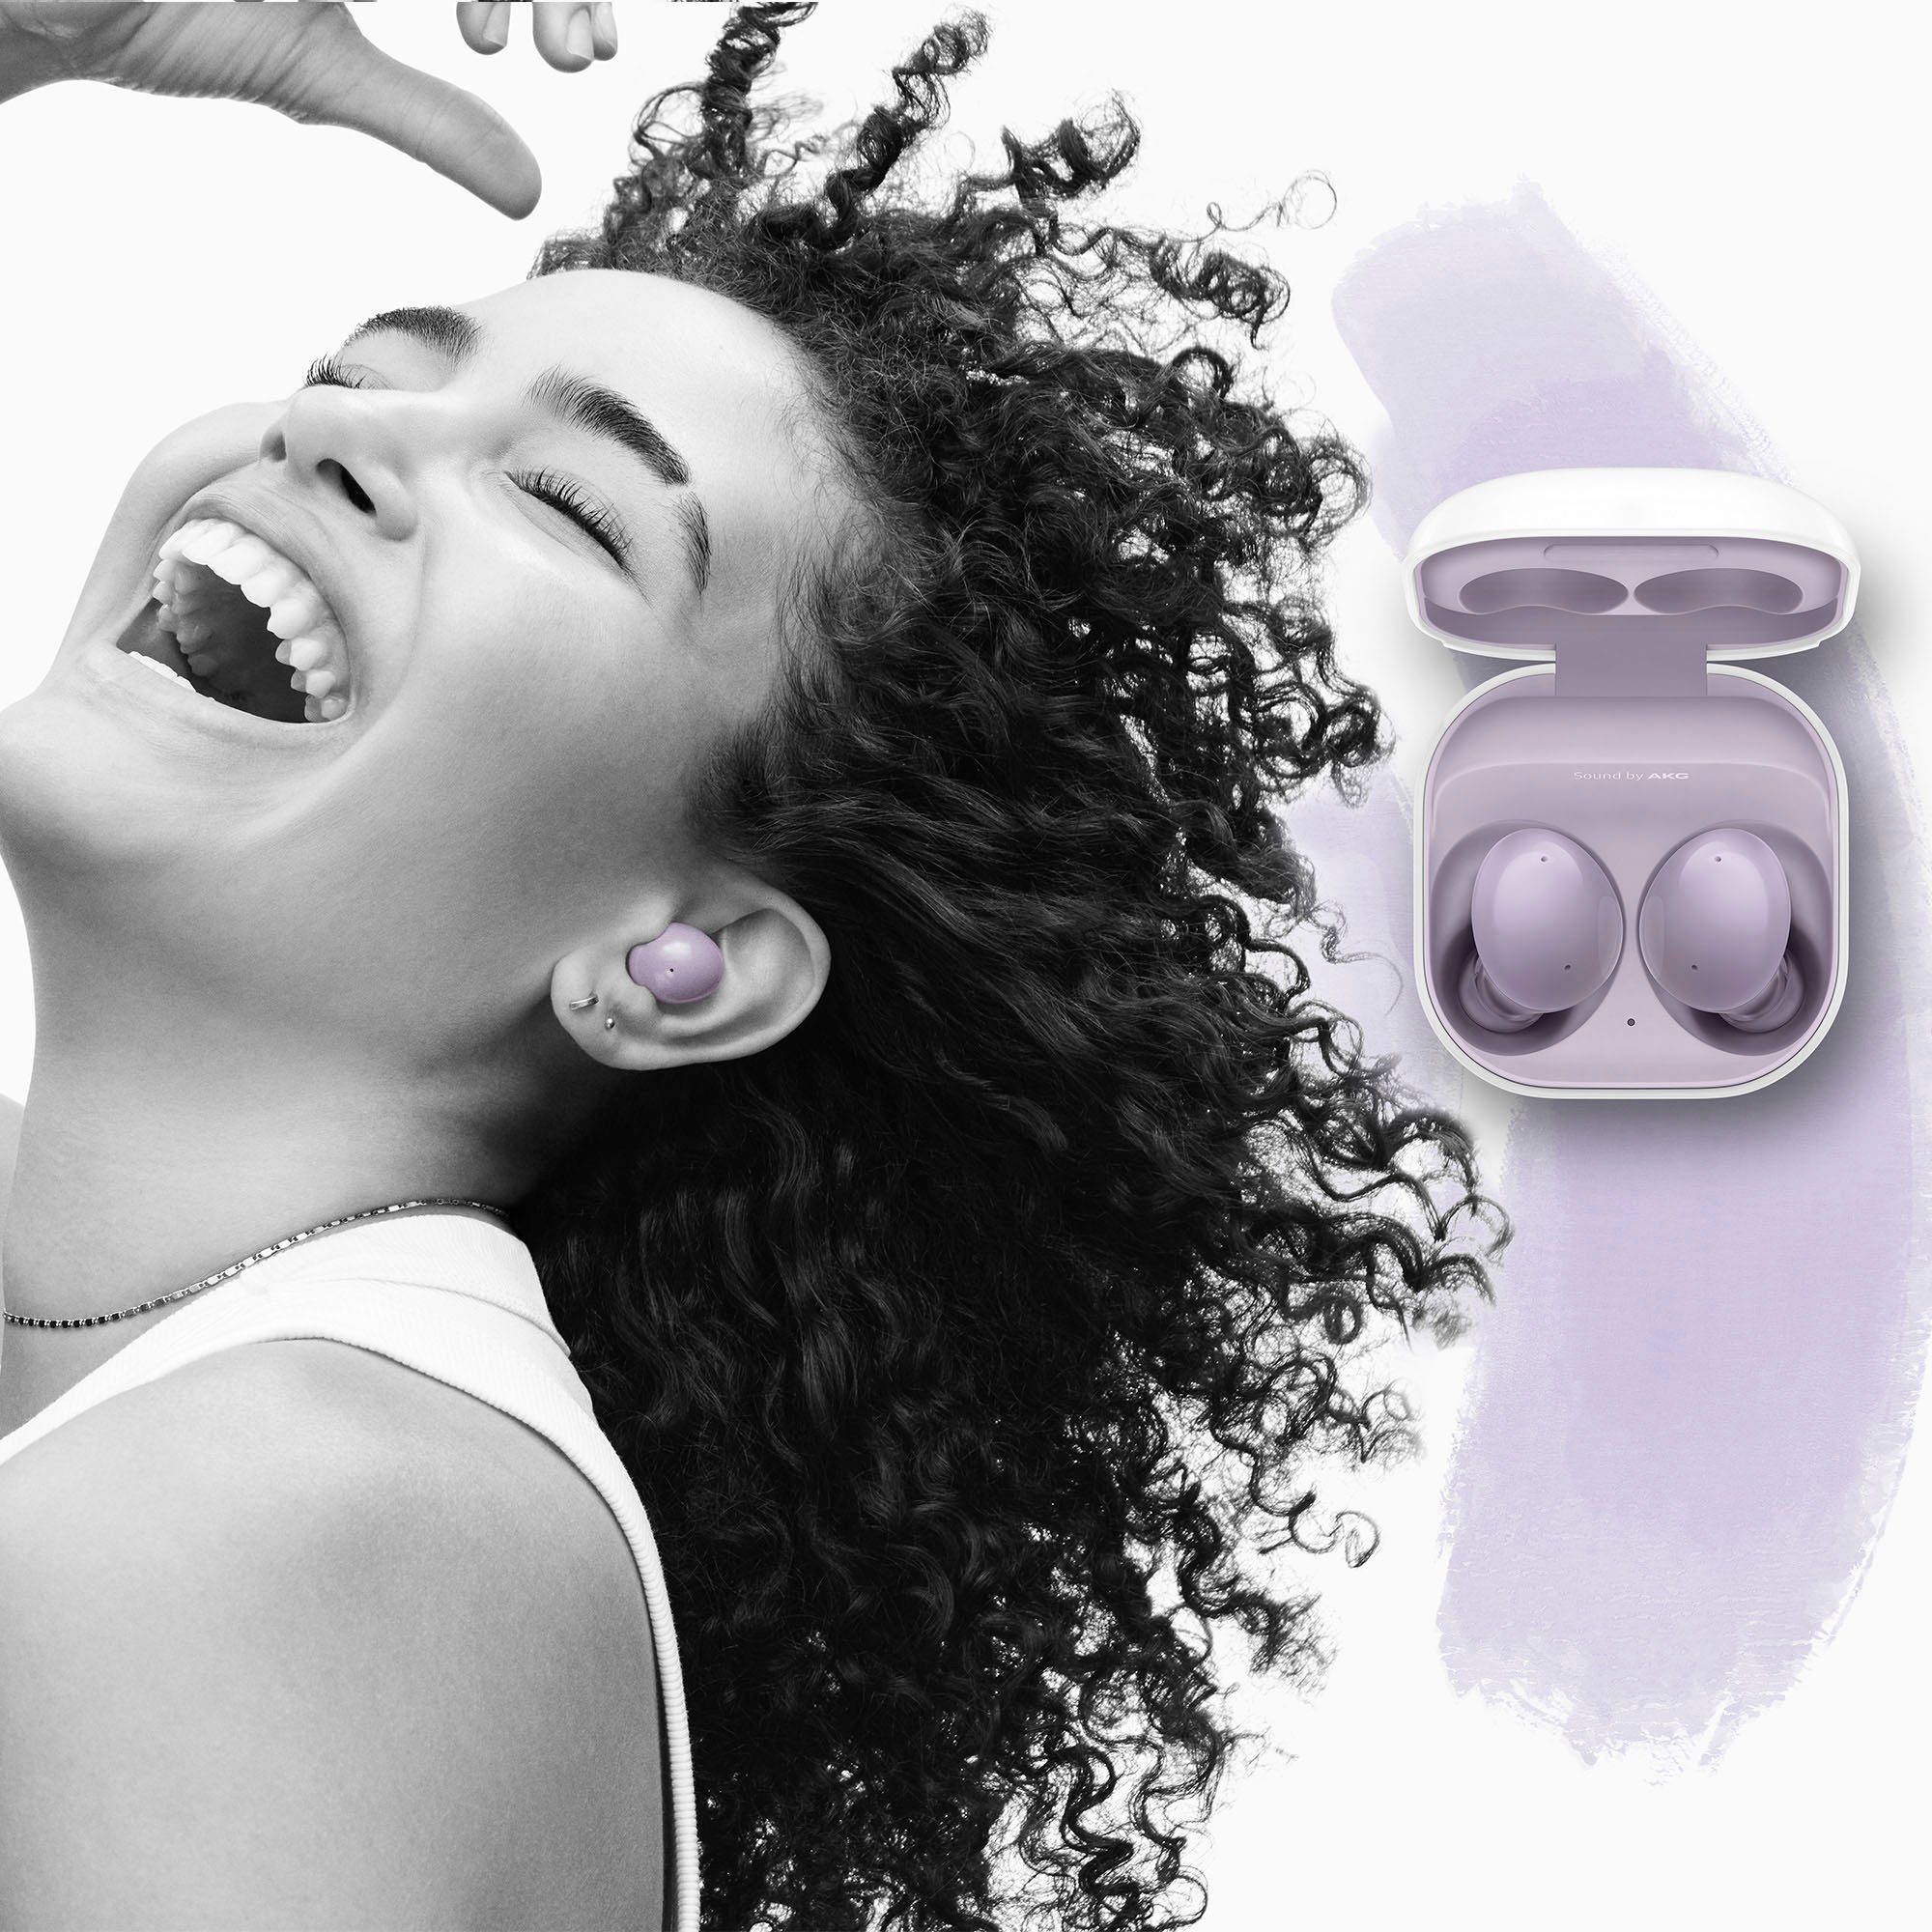 Samsung Galaxy Buds2 In-Ear-Kopfhörer Cancelling (ANC), Olive (Active Noise Bluetooth)